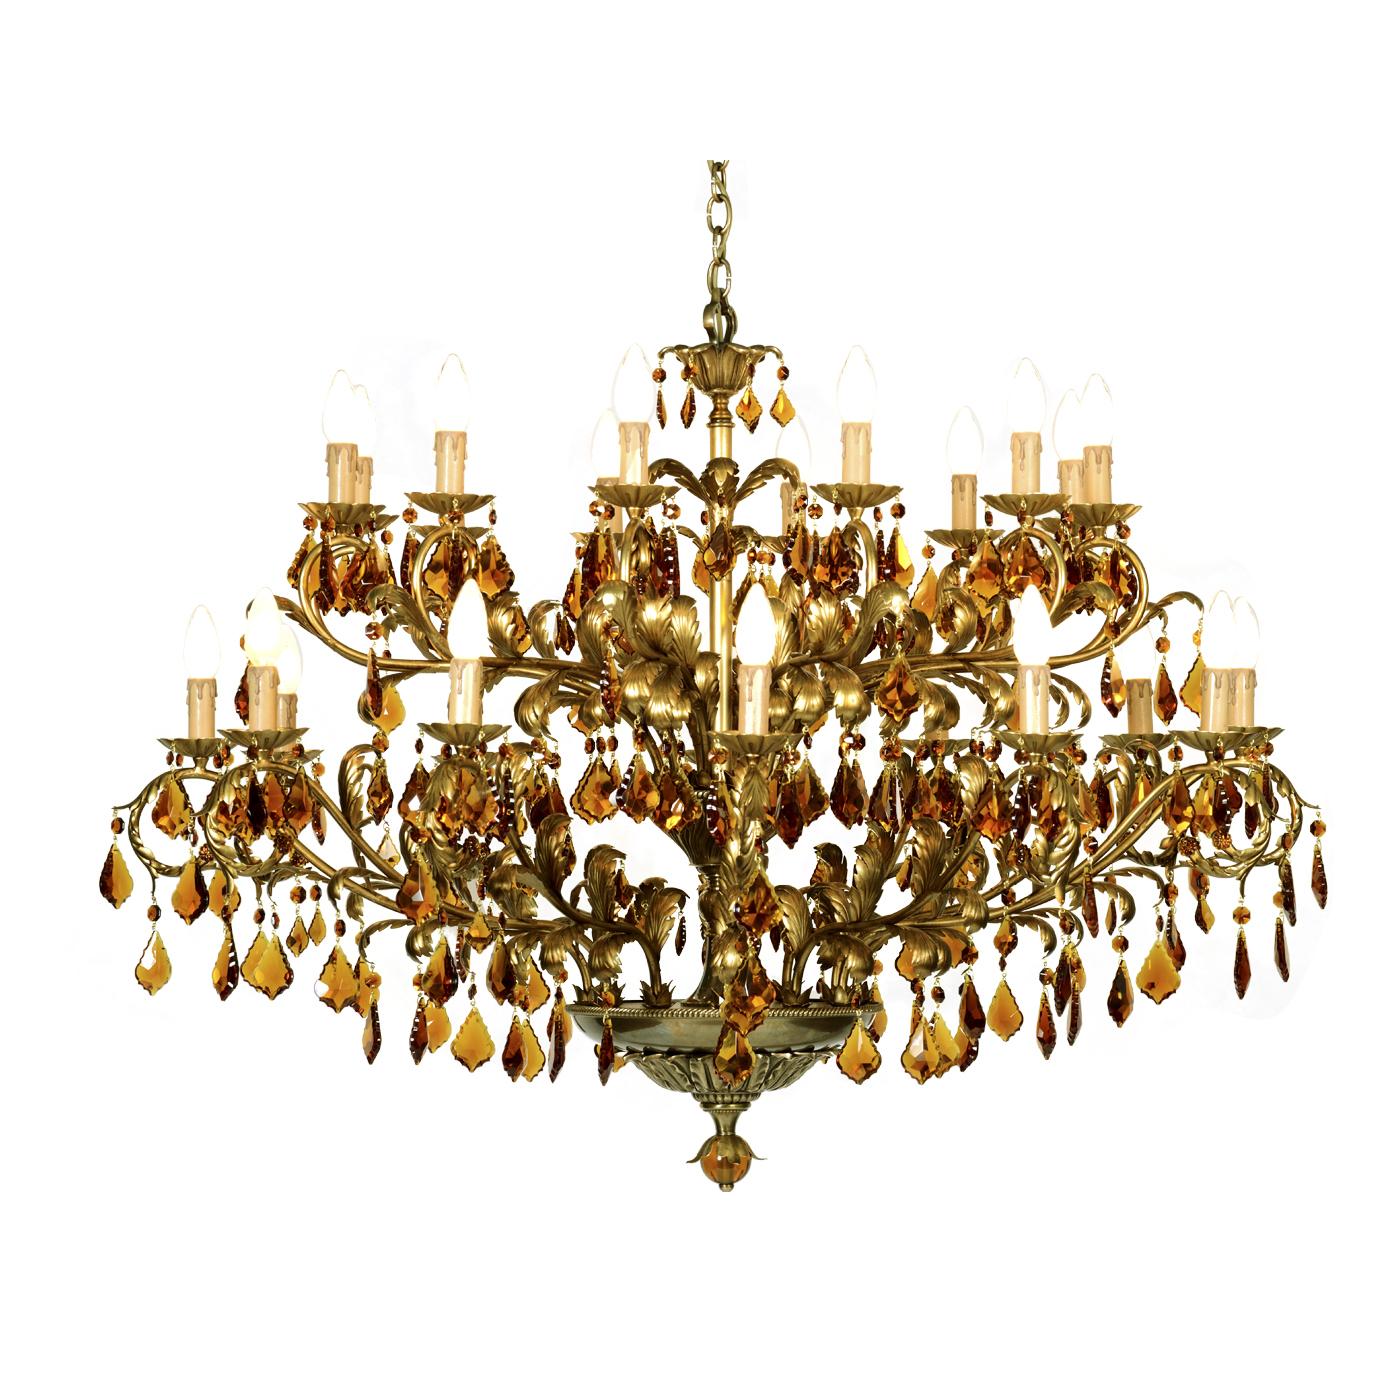 This superb chandelier features 24 sinuous arms in bronze with an aged brass finish and details in iron finished with gold leaf. Each arm supports a light and is adorned with pendants in crystal with a delicate amber color. This piece will make a